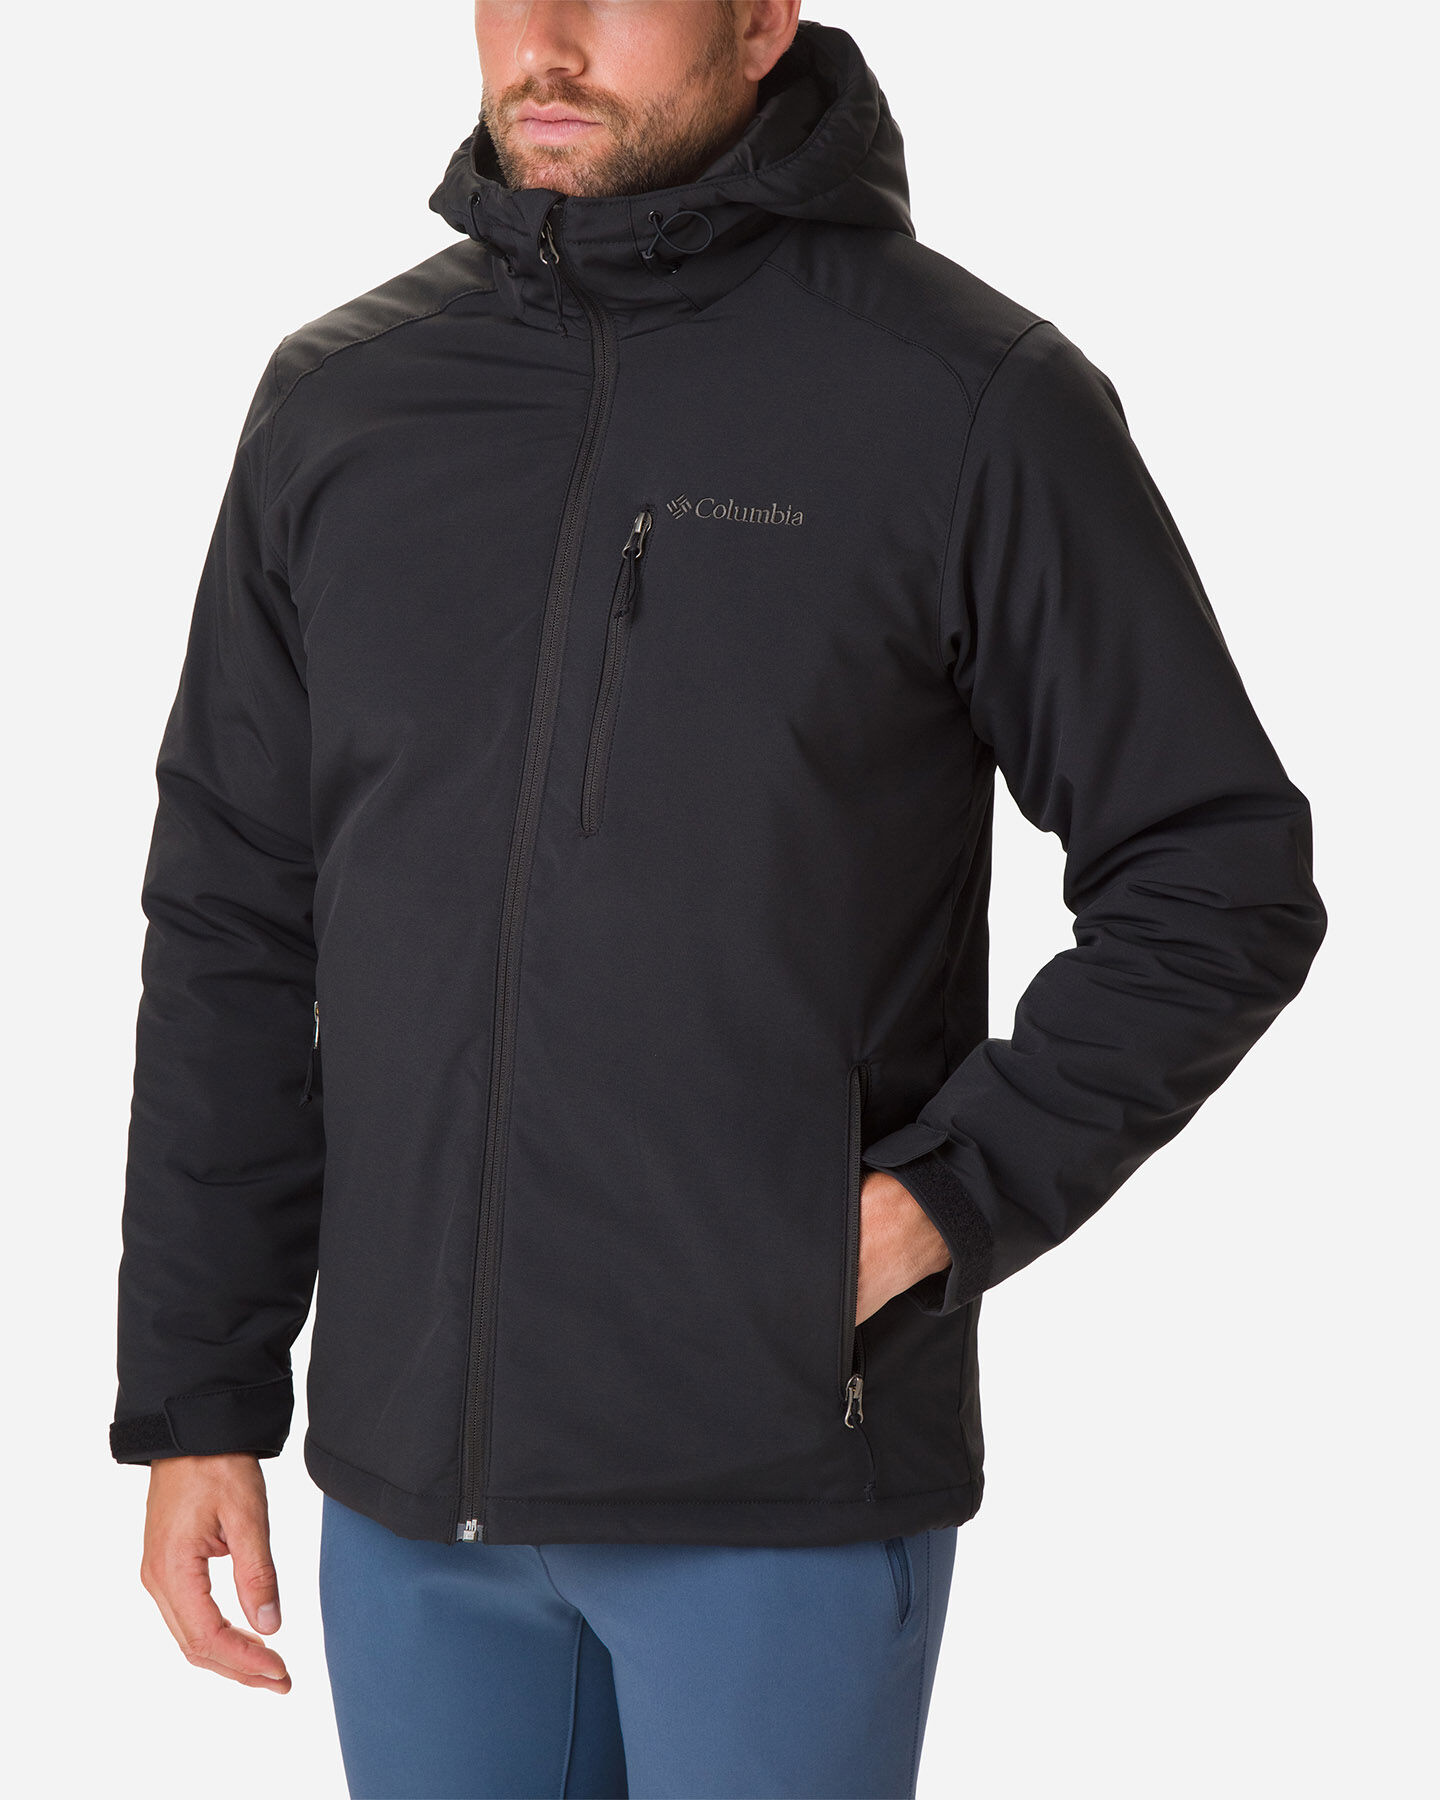  Giubbotto COLUMBIA SOFTSHELL GATE RACER M S5093593|014|S scatto 0